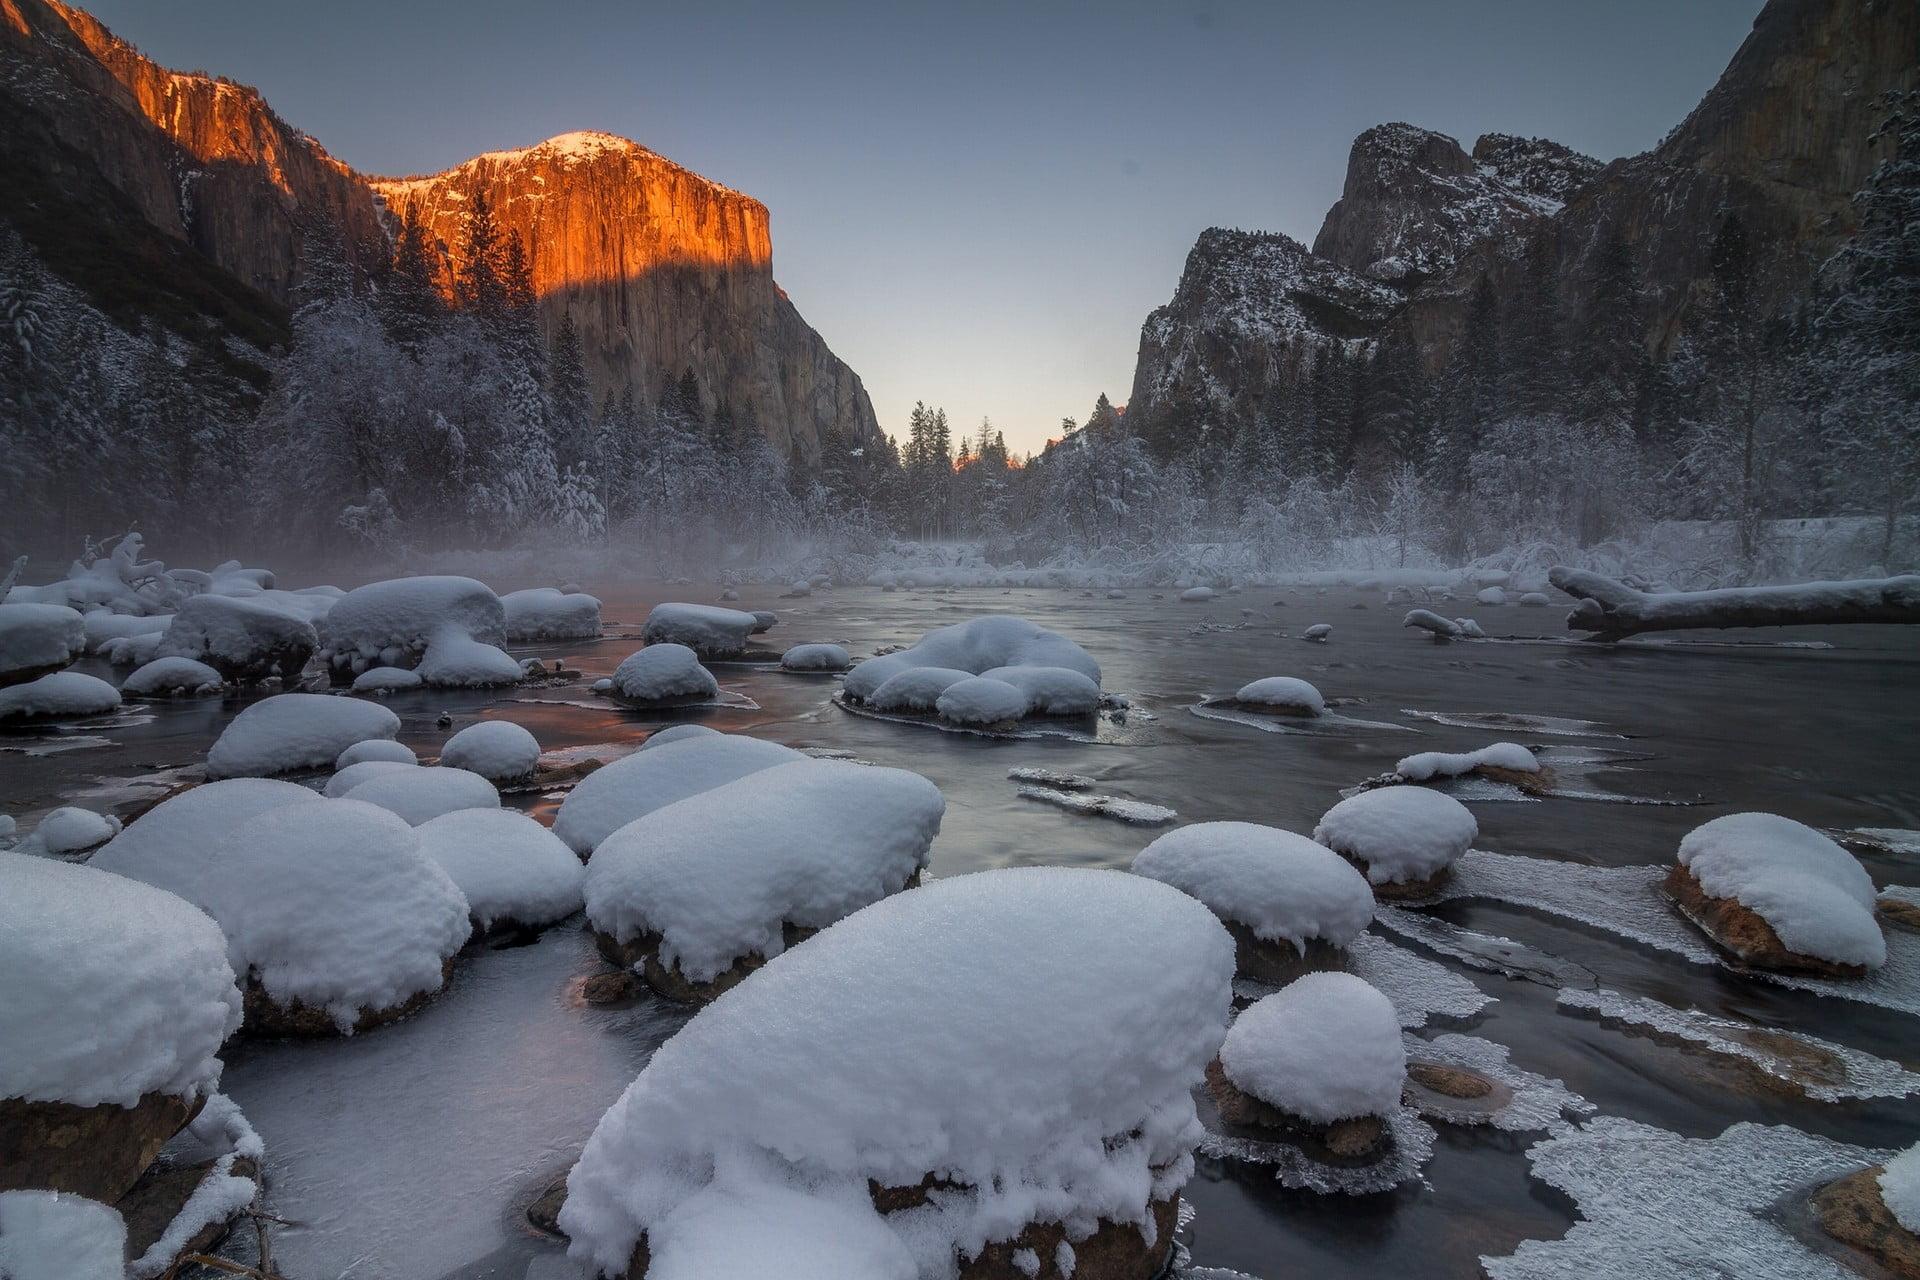 Snow Covered Stones, Landscape, Trees, Winter, Yosemite National